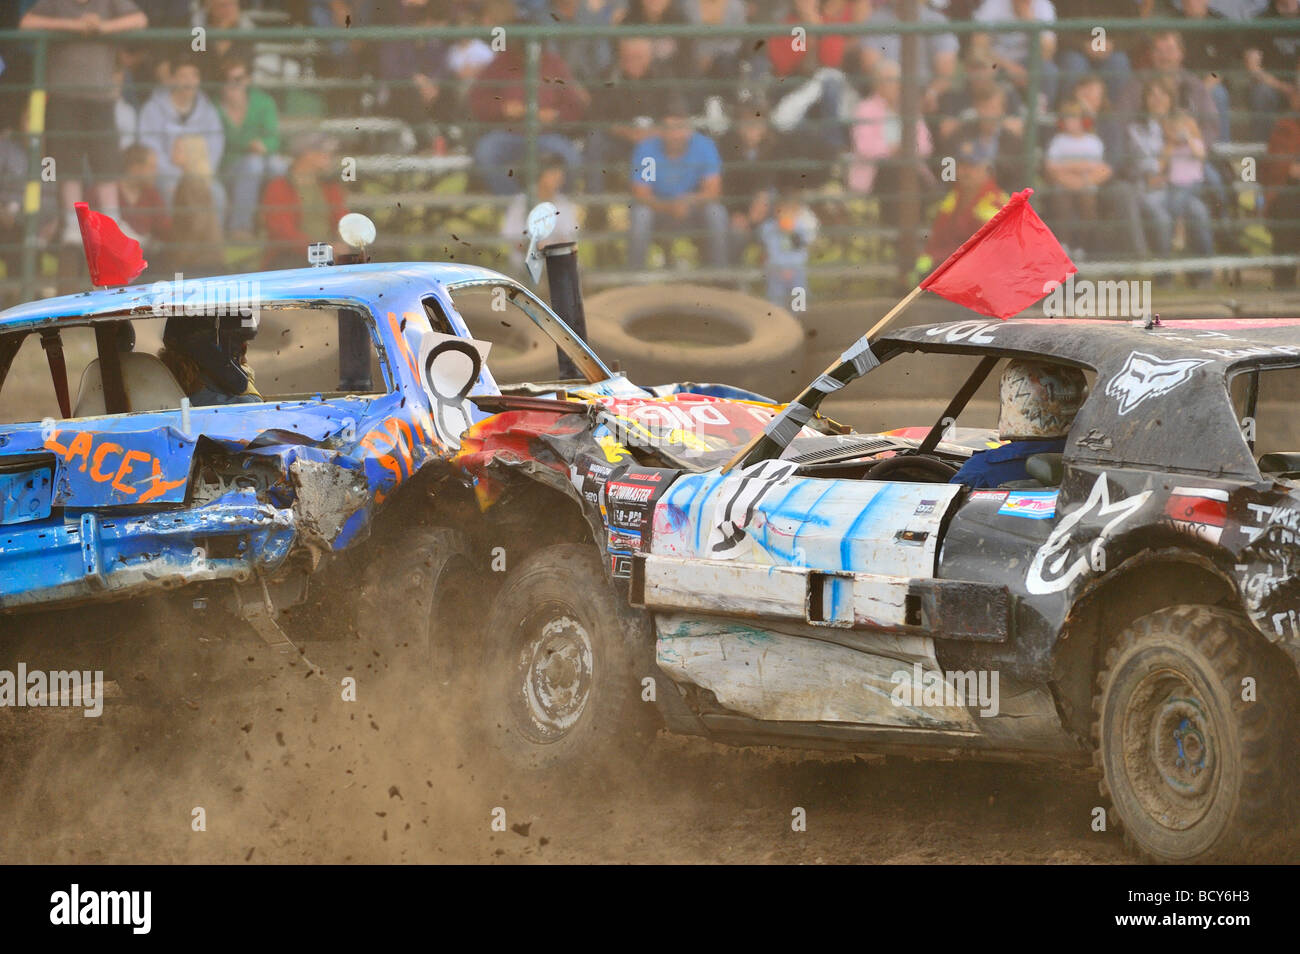 Two cars smash into each other at a demolition derby event Stock Photo